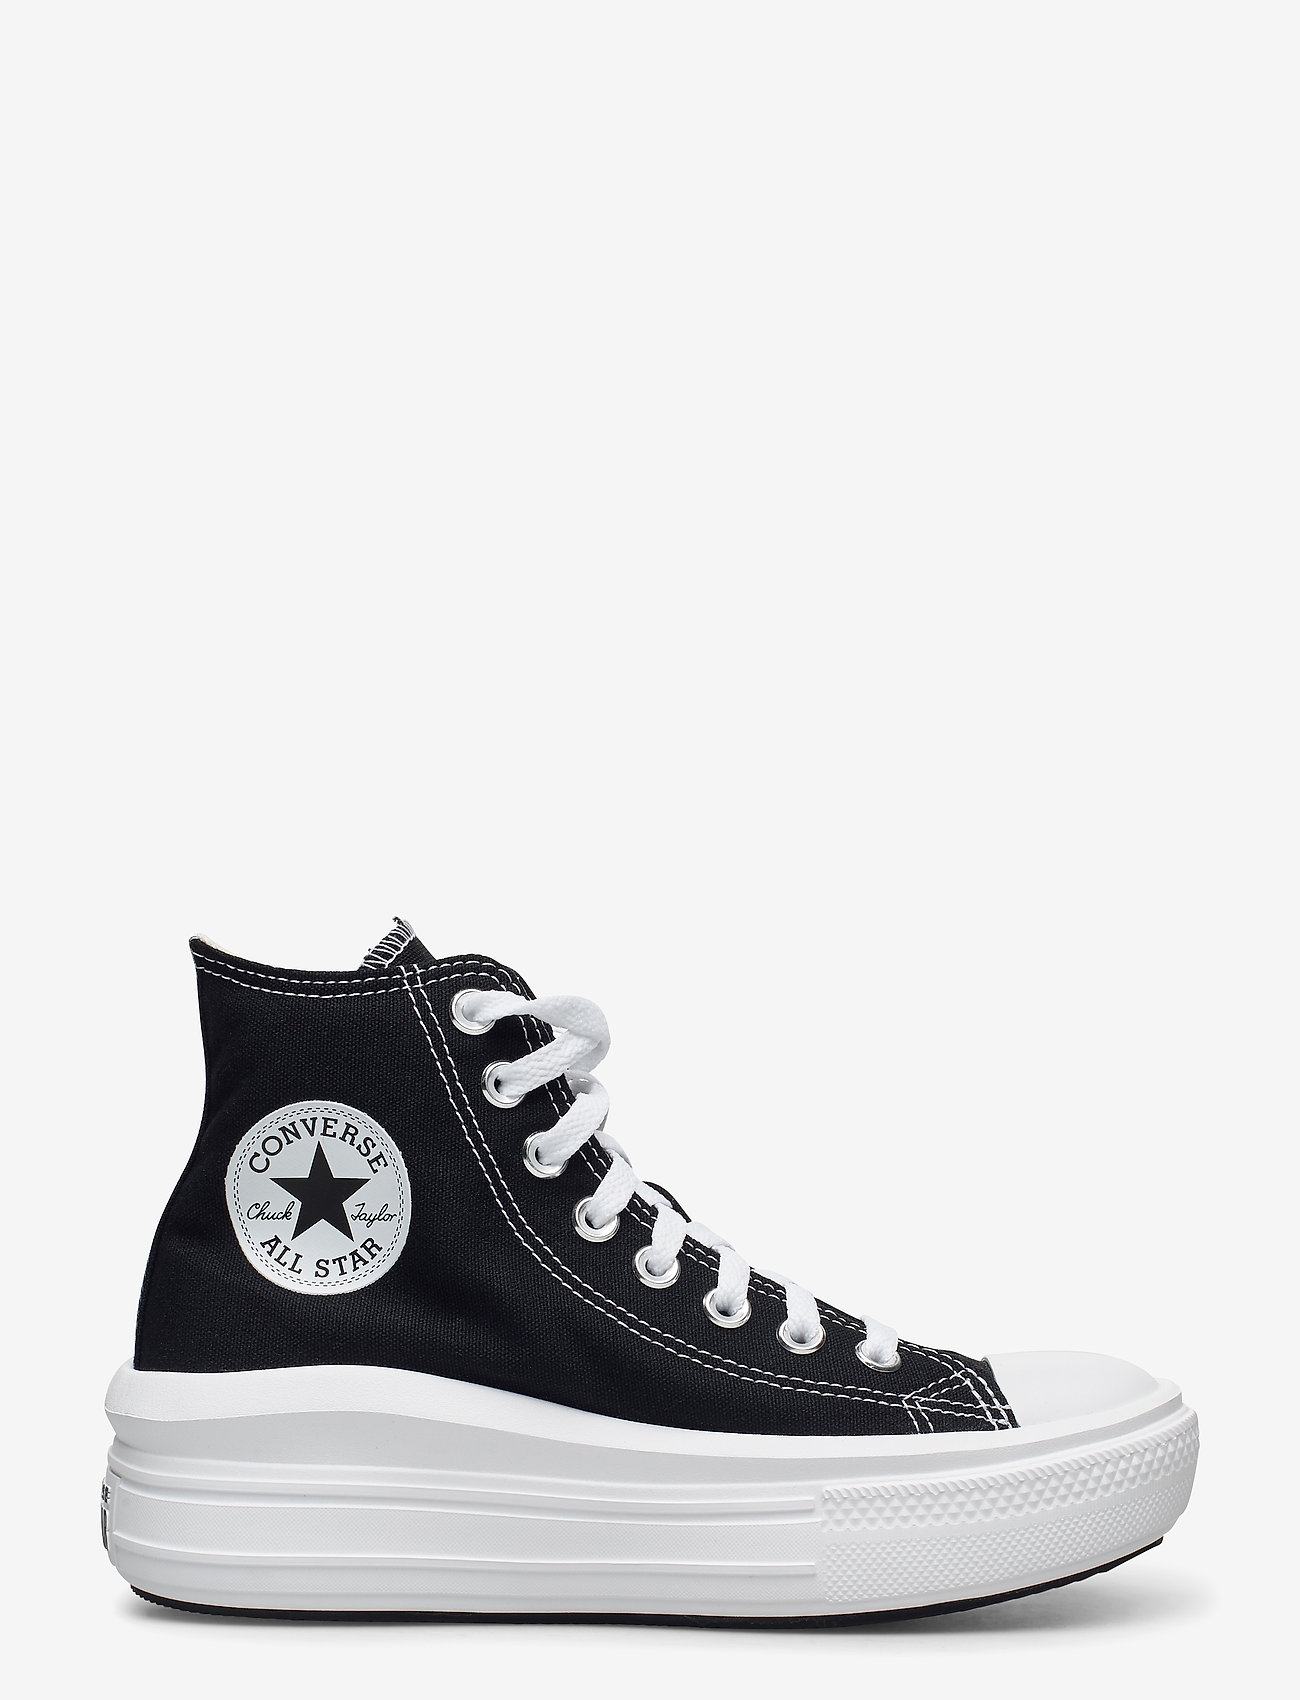 Converse Chuck Taylor Star Move - Høje Sneakers | Boozt.com